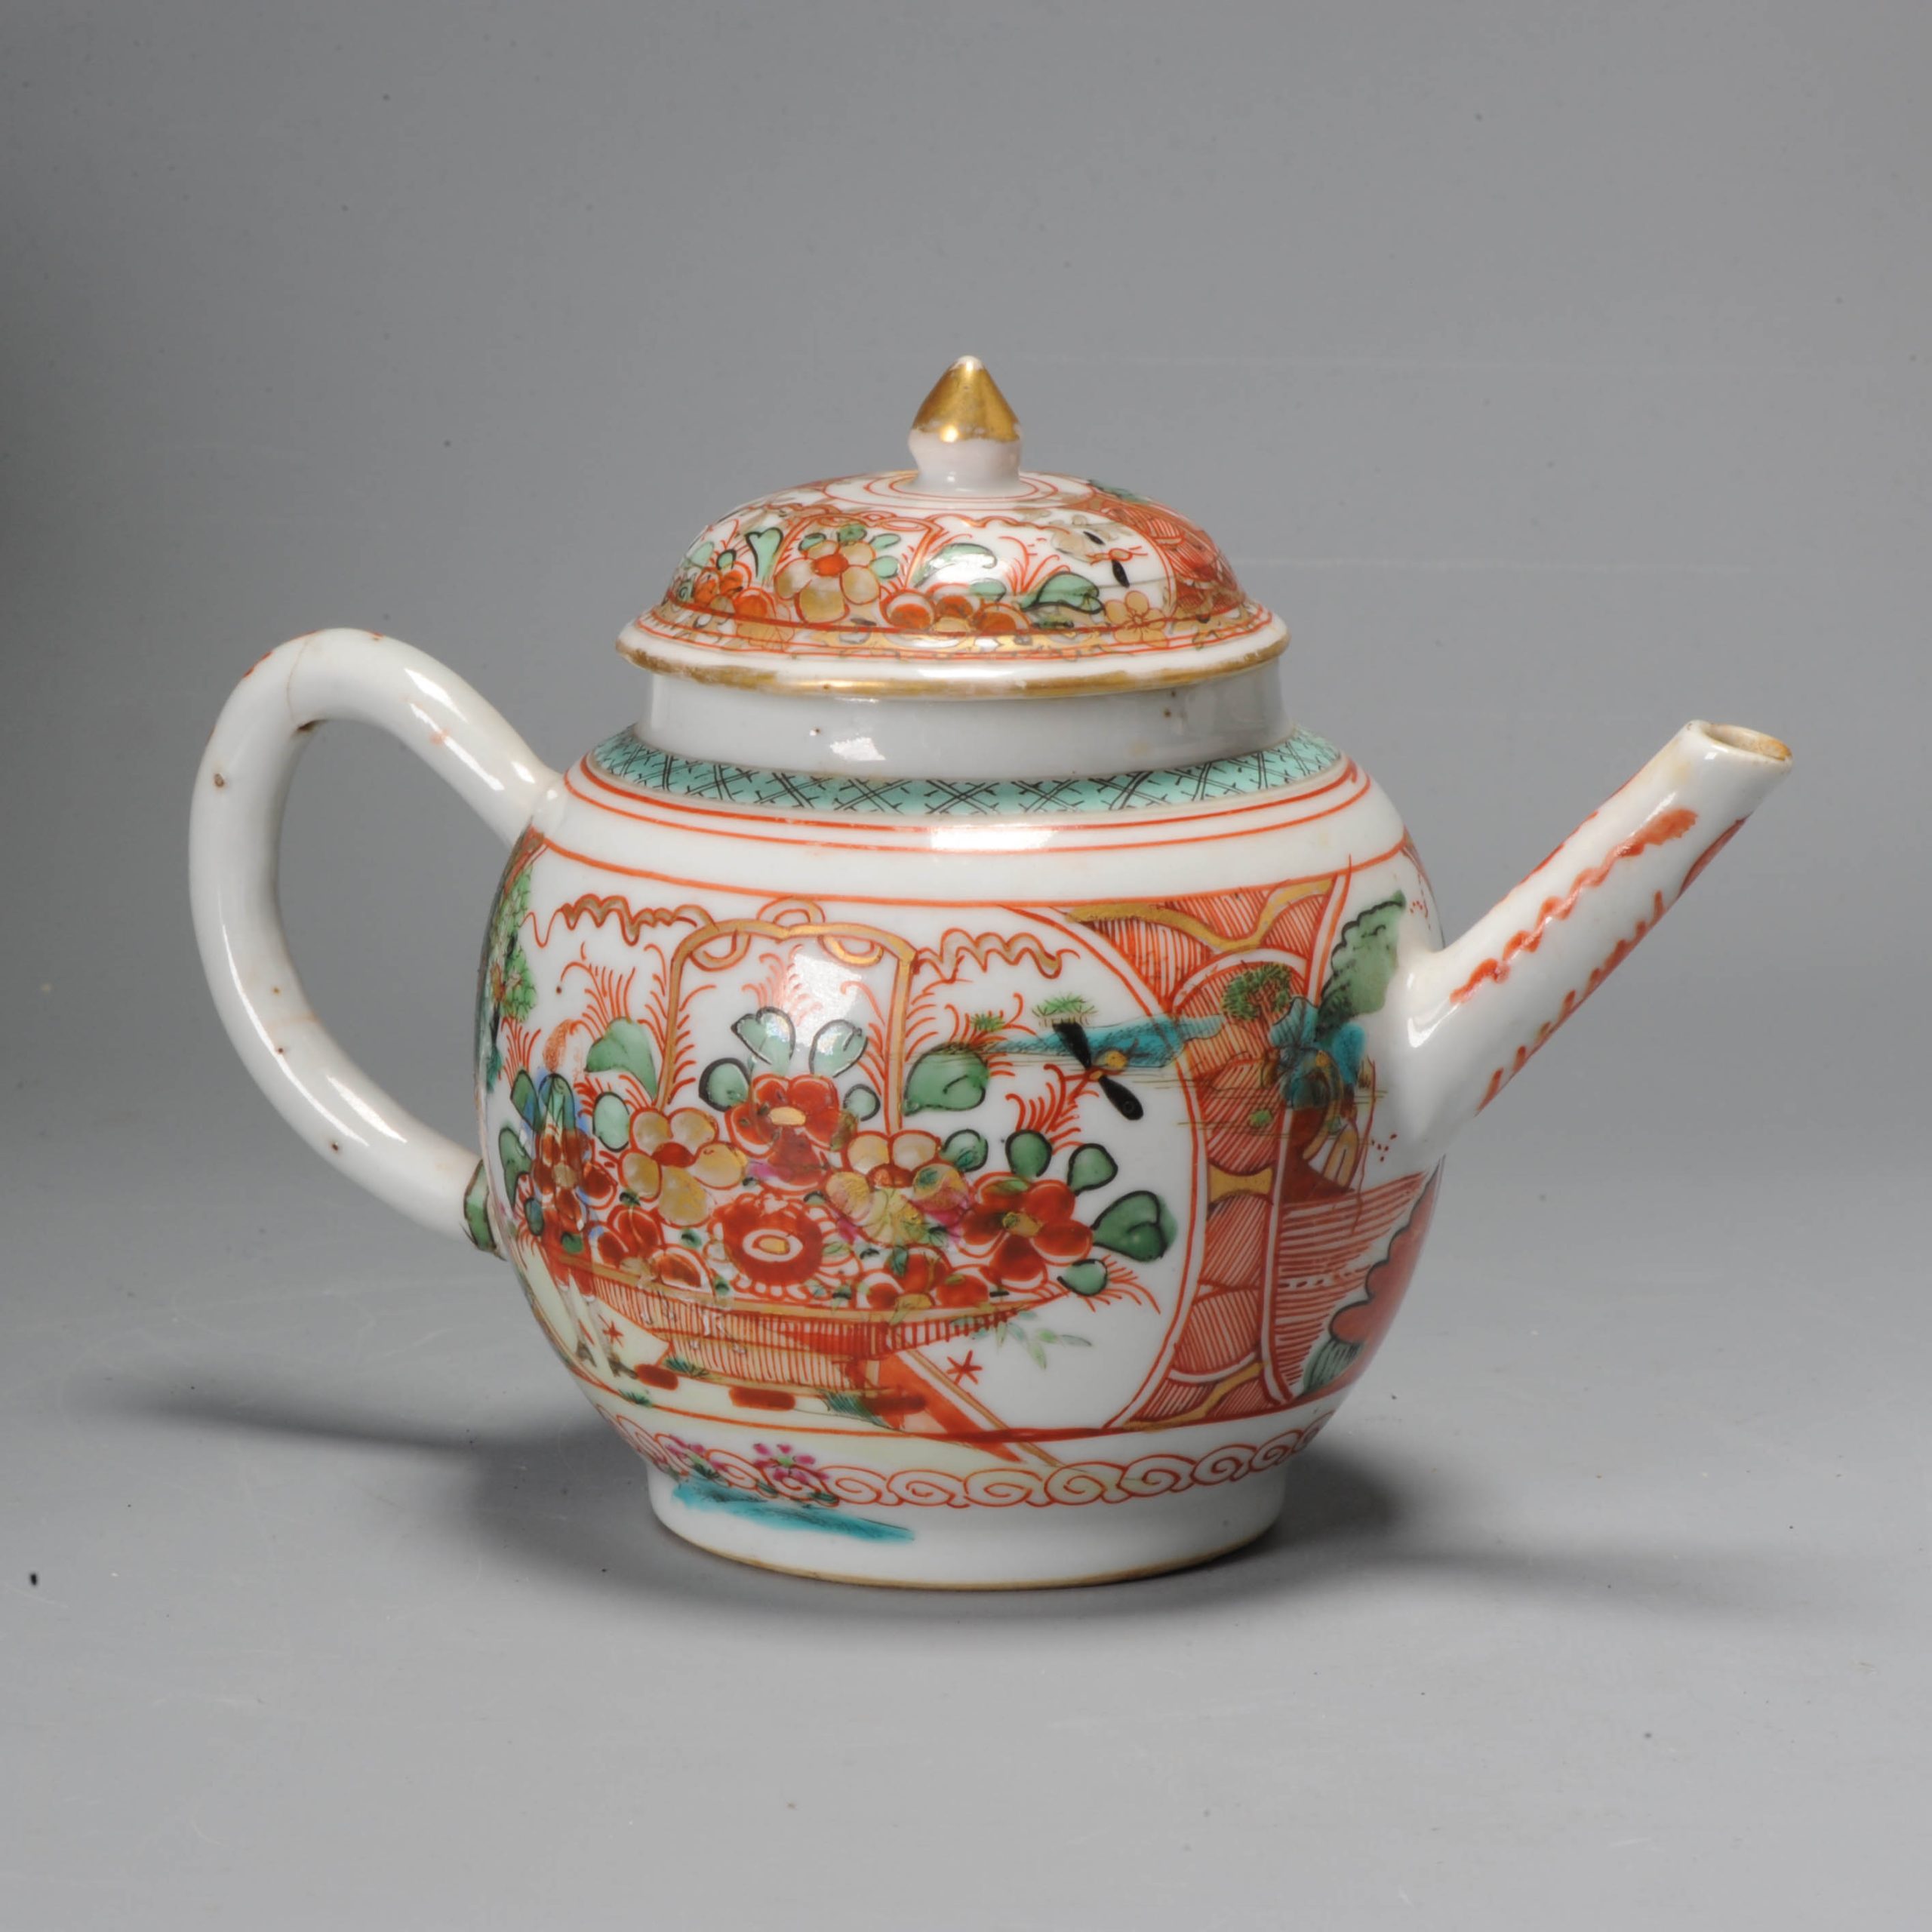 1029 Very nice Chinese Teapot. Repainted in Holland. Amsterdam Bont